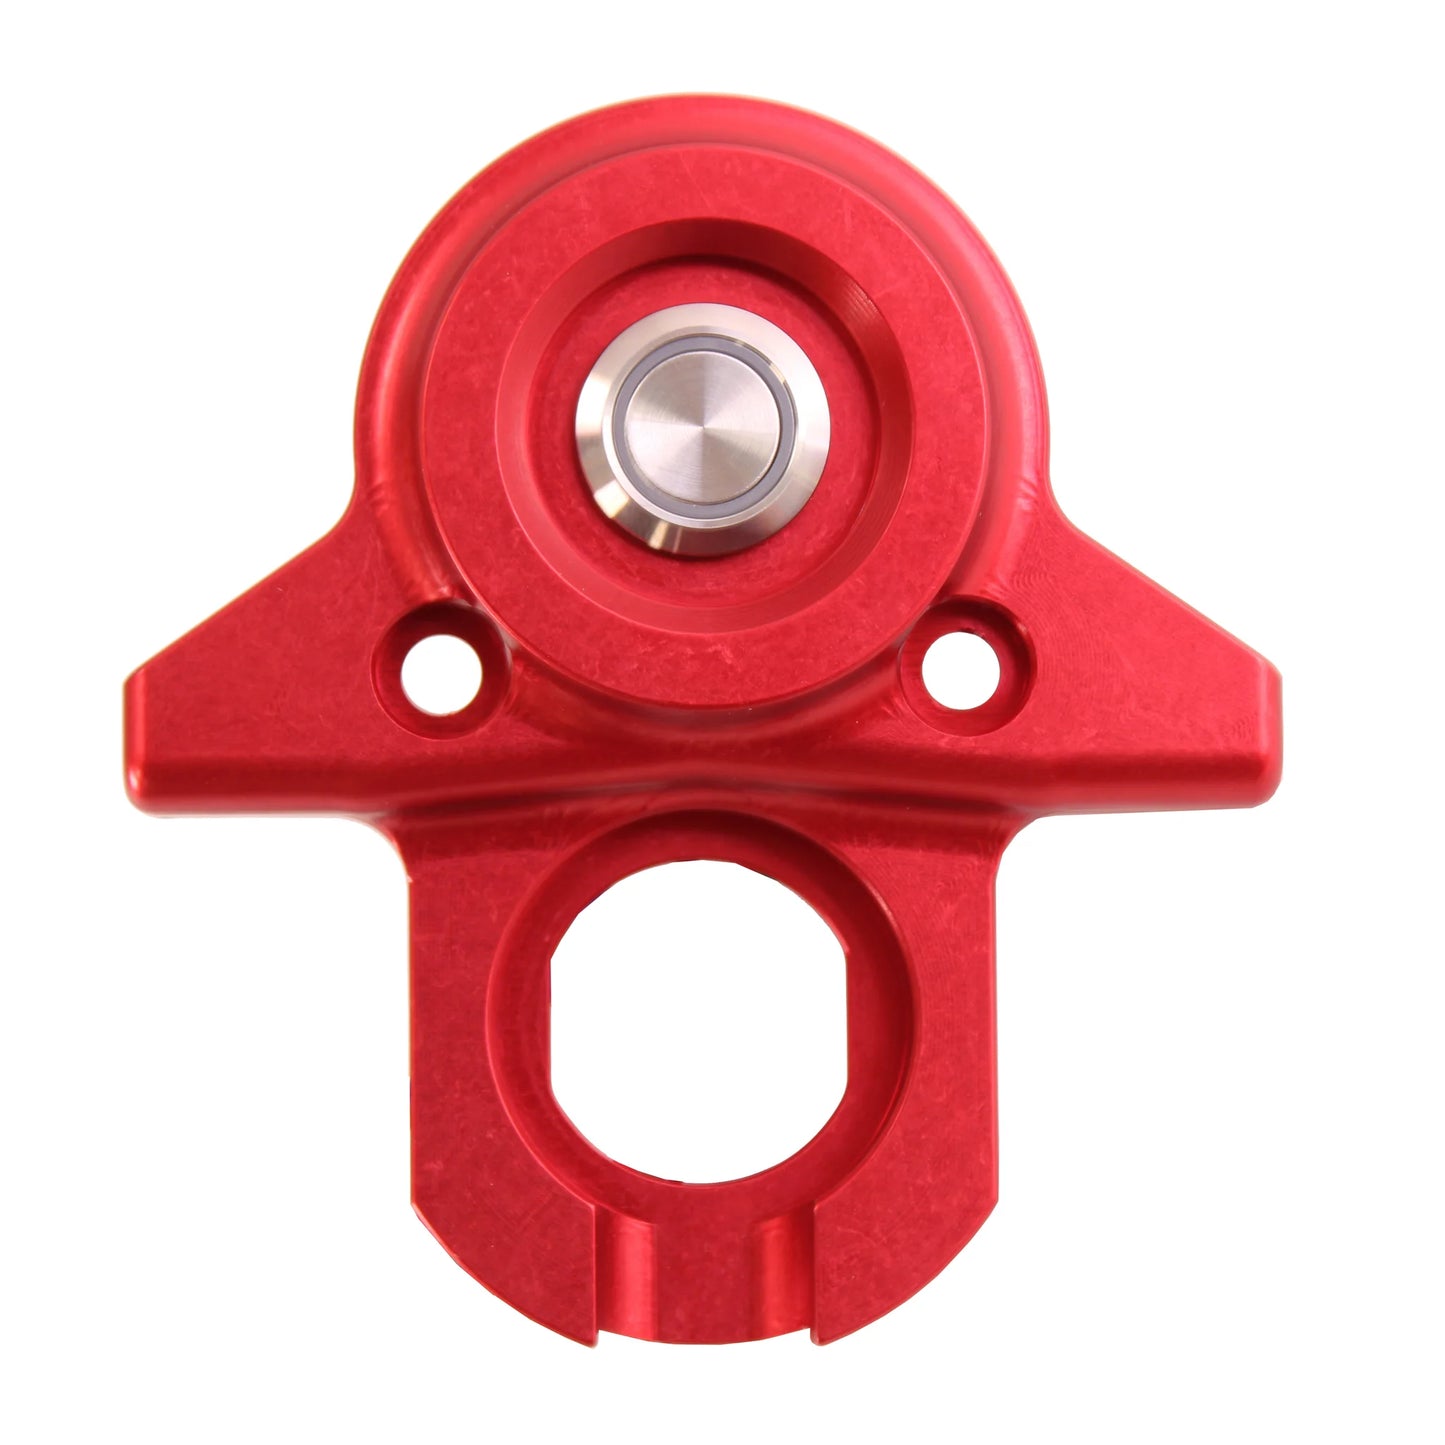 Push Button Version Ignition Switch Cover / Mount Plate SurRonshop